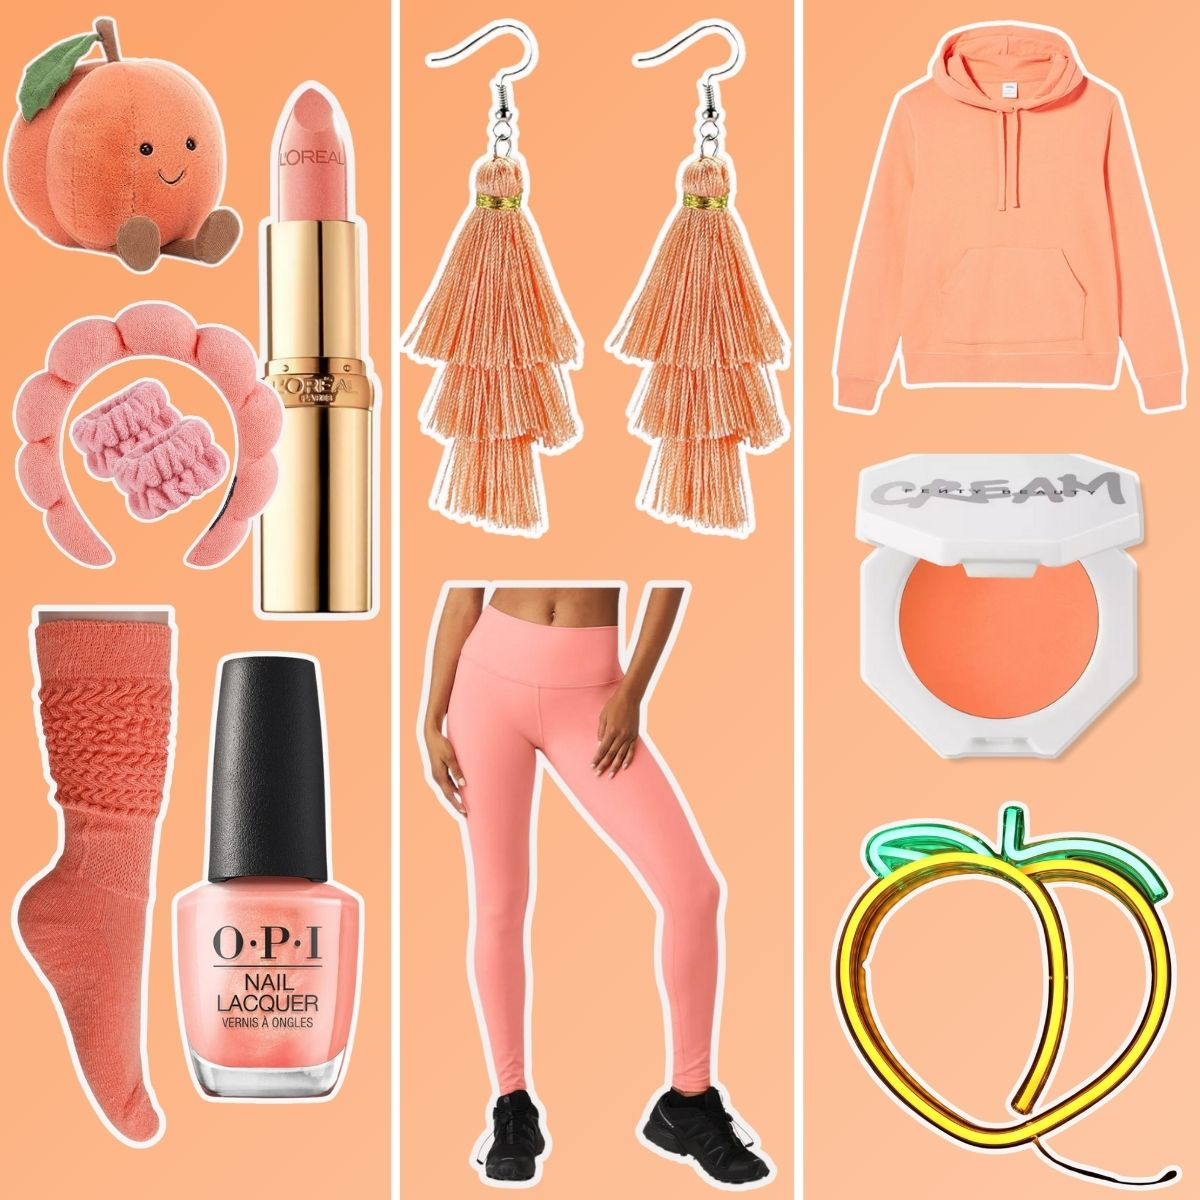 Re: Neon Coral-Pink lipstick - help me f - Page 4 - Beauty Insider  Community